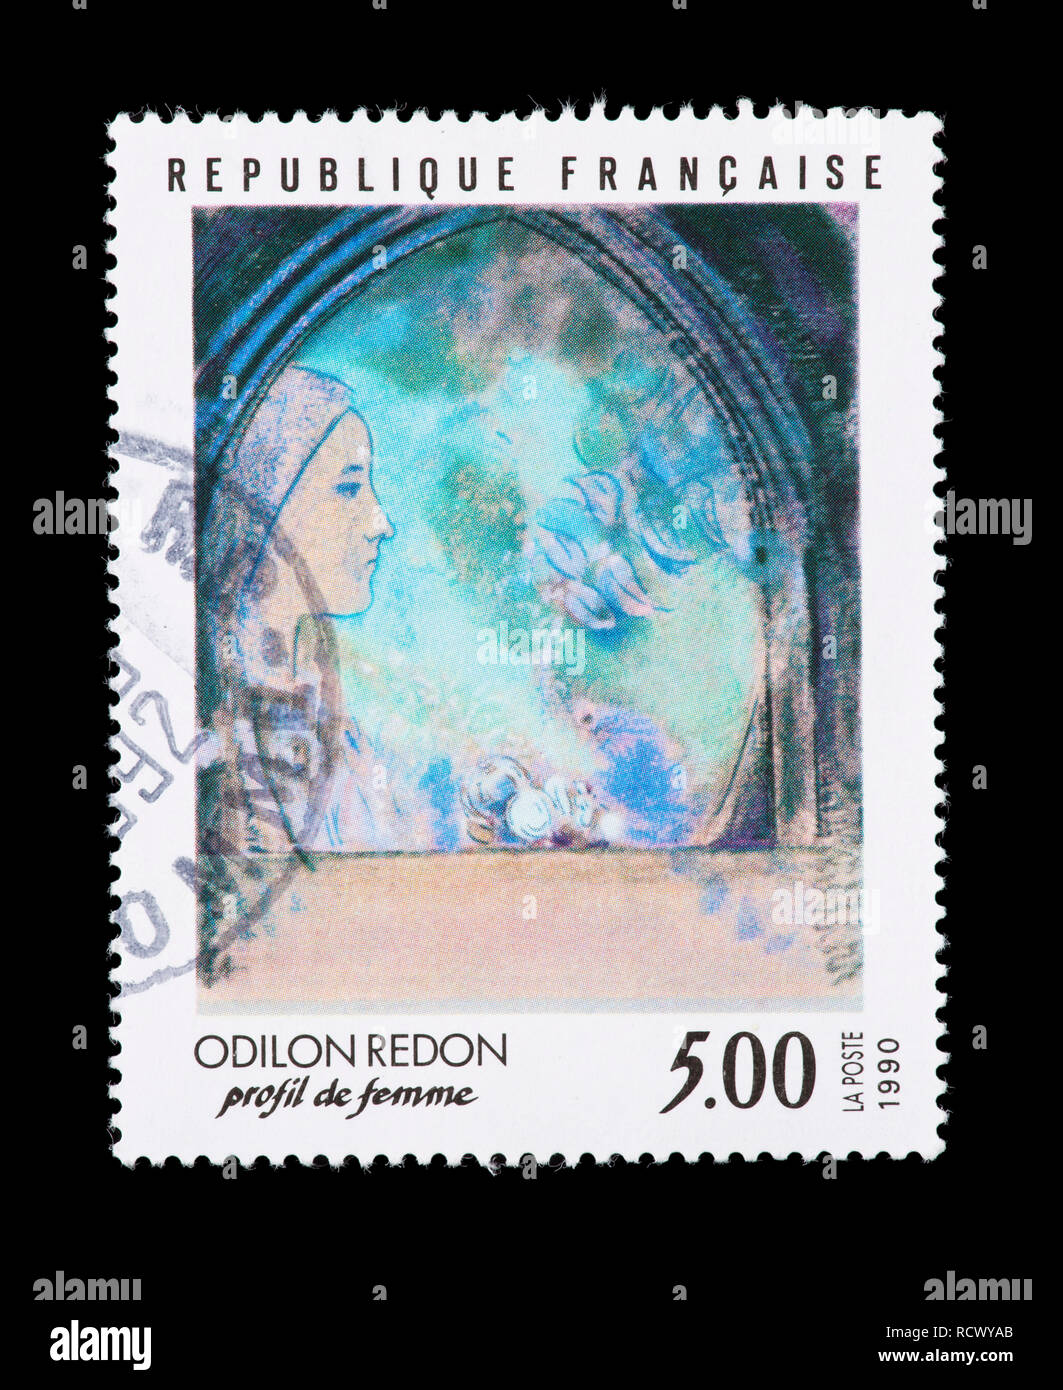 Postage stamp from France depicting the Odilon Redon painting Profile of a Woman Stock Photo